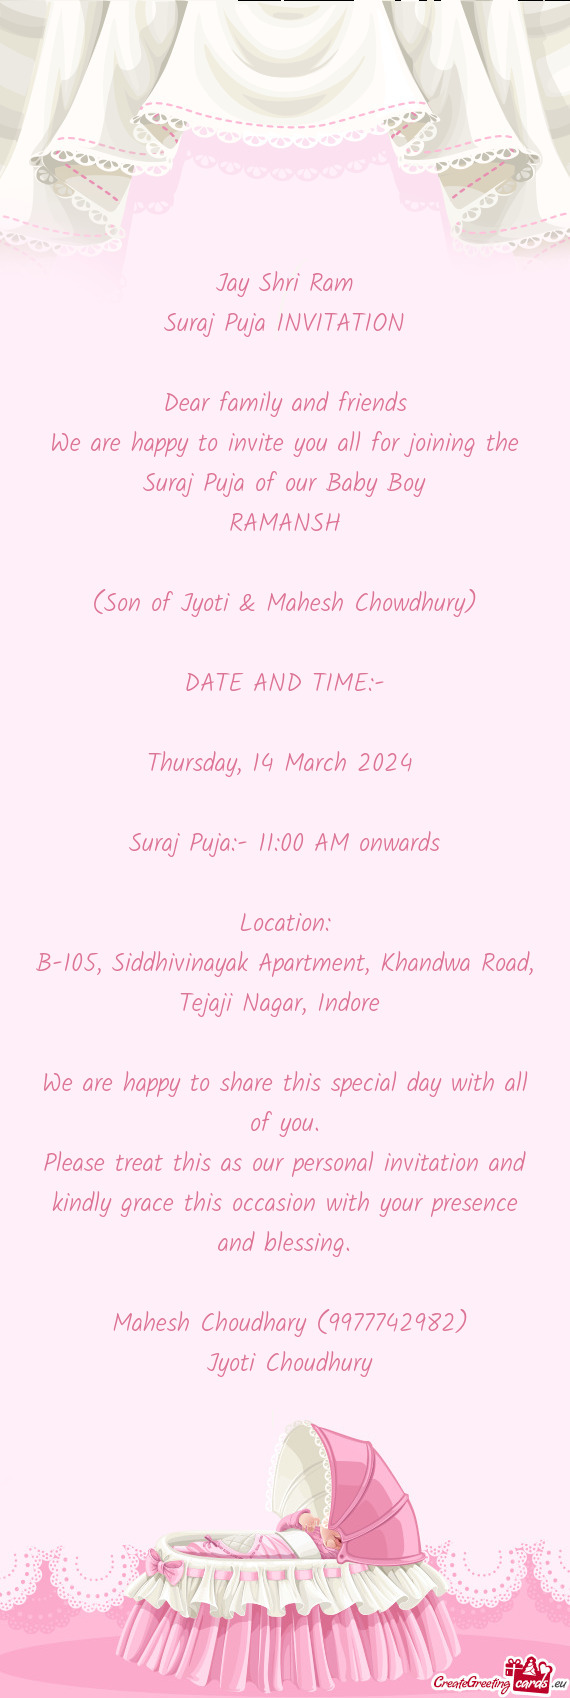 We are happy to invite you all for joining the Suraj Puja of our Baby Boy